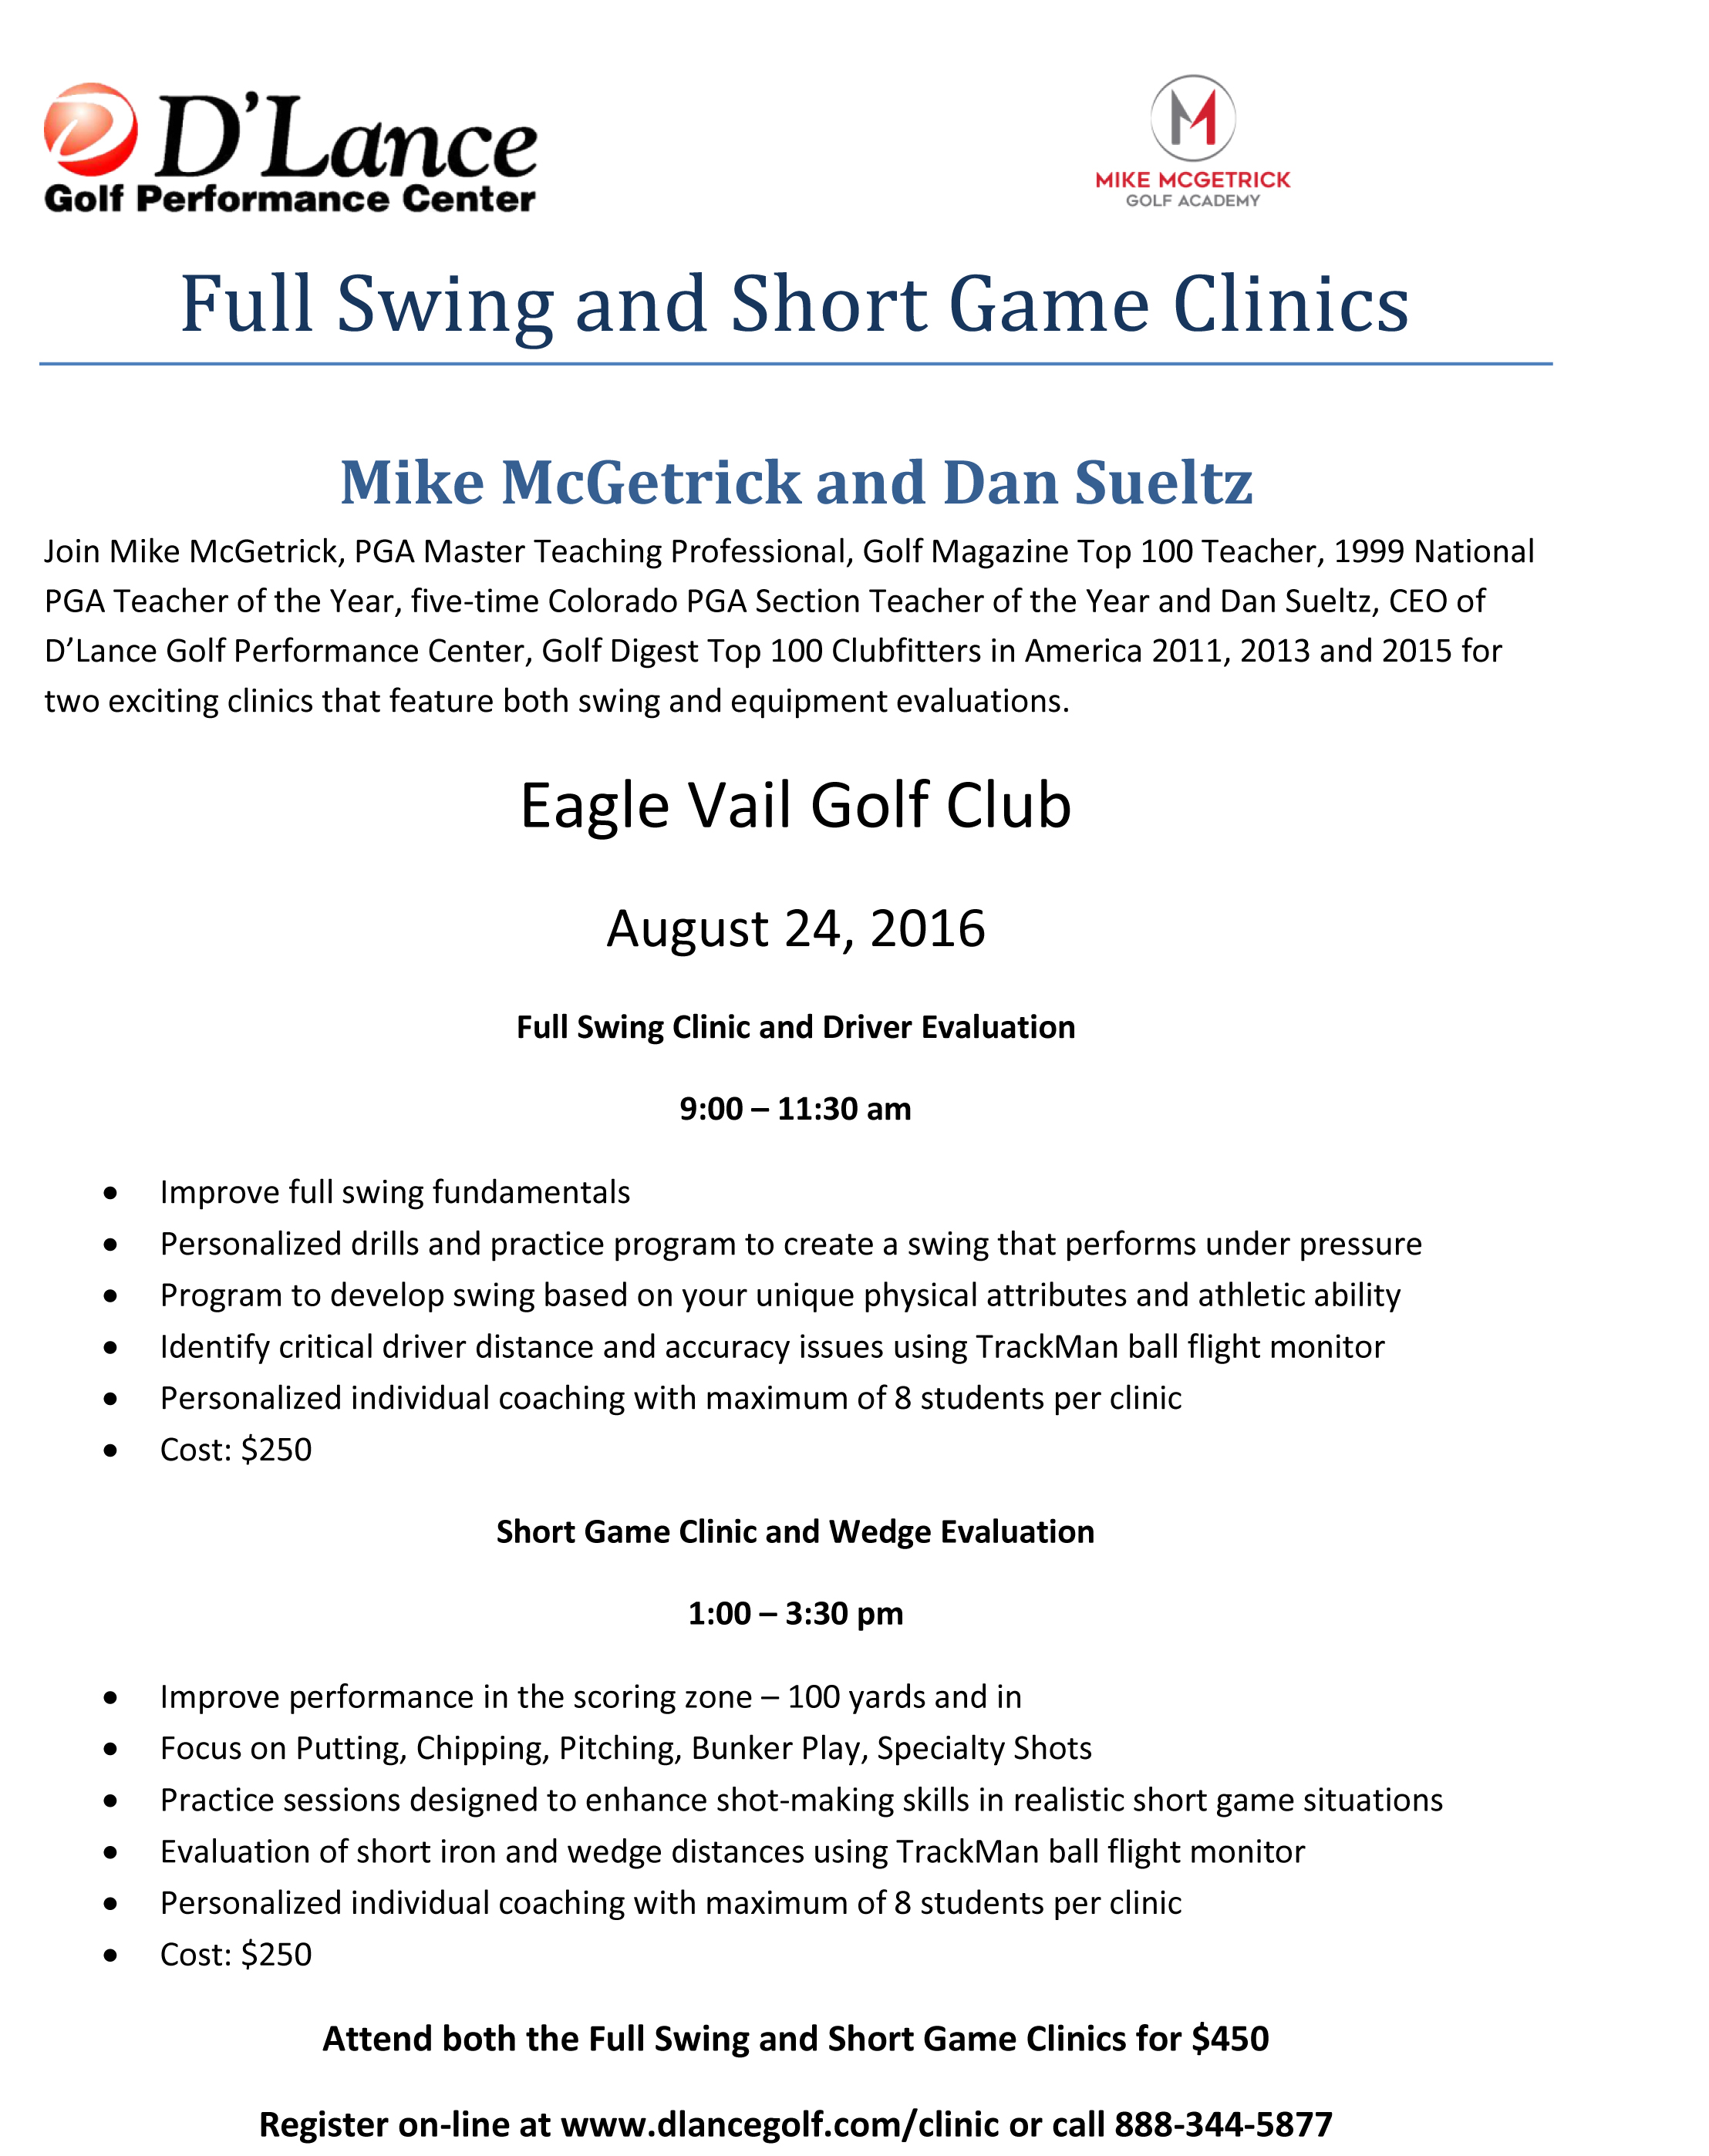 Full Swing and Short Game Clinics